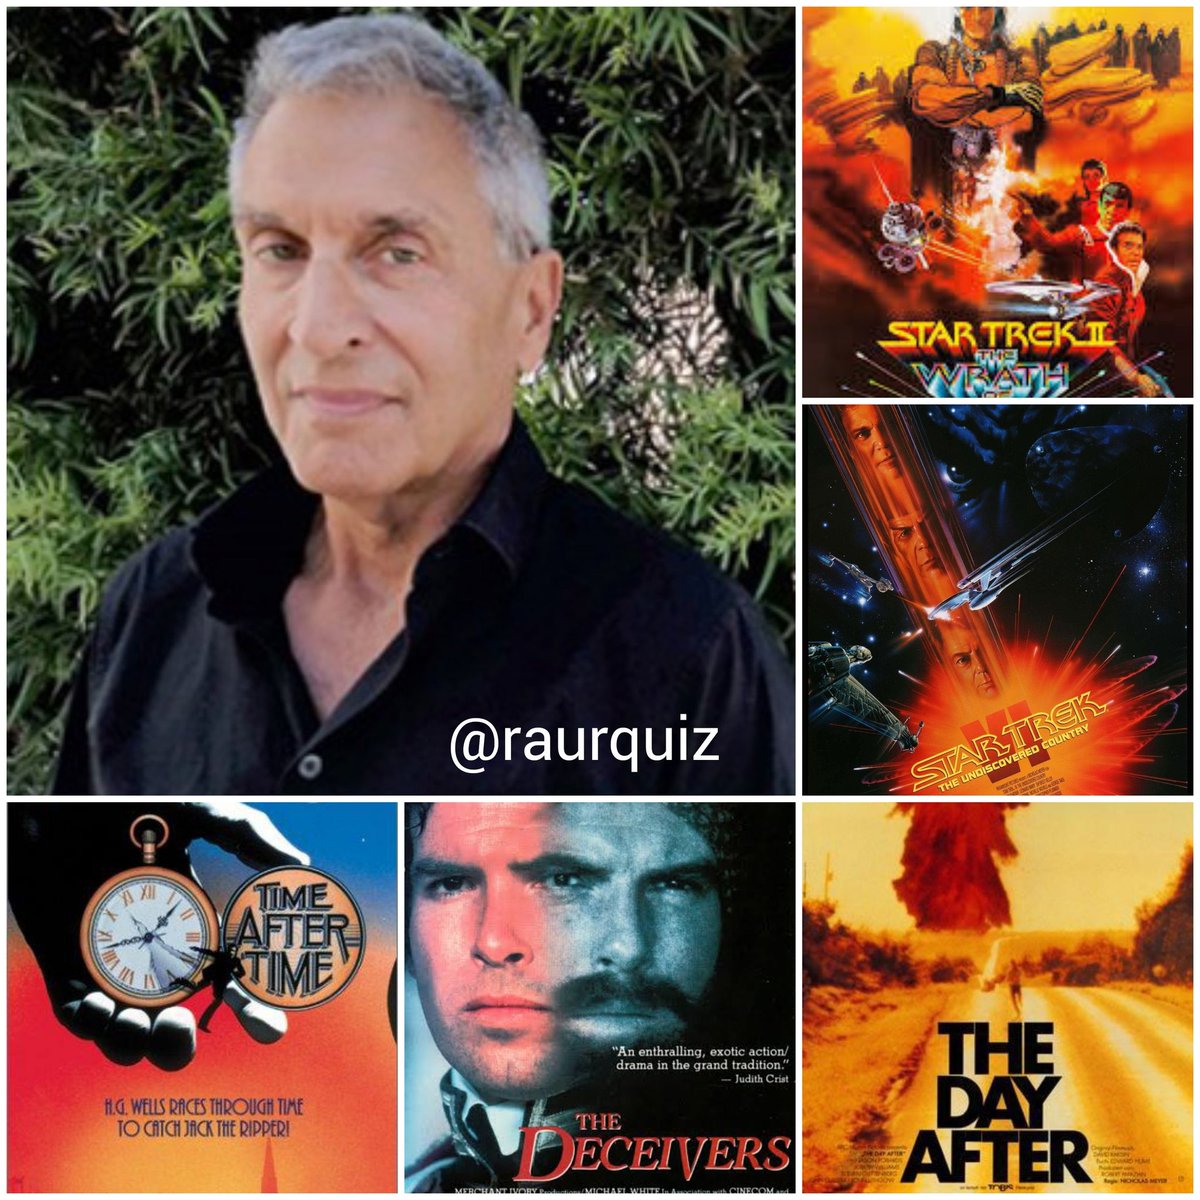 #HappyBirthday @NicholasMQ #nicholasmeyer #director #producer #writer #startrek #TheWrarhofKhan #TheUndiscoveredCountry #timeaftertime #thedayafter #fearietaletheatre #volunteers #thedeceivers #companybusiness #vendetta #startrek57 @startrek @startrekonpplus @TrekCore